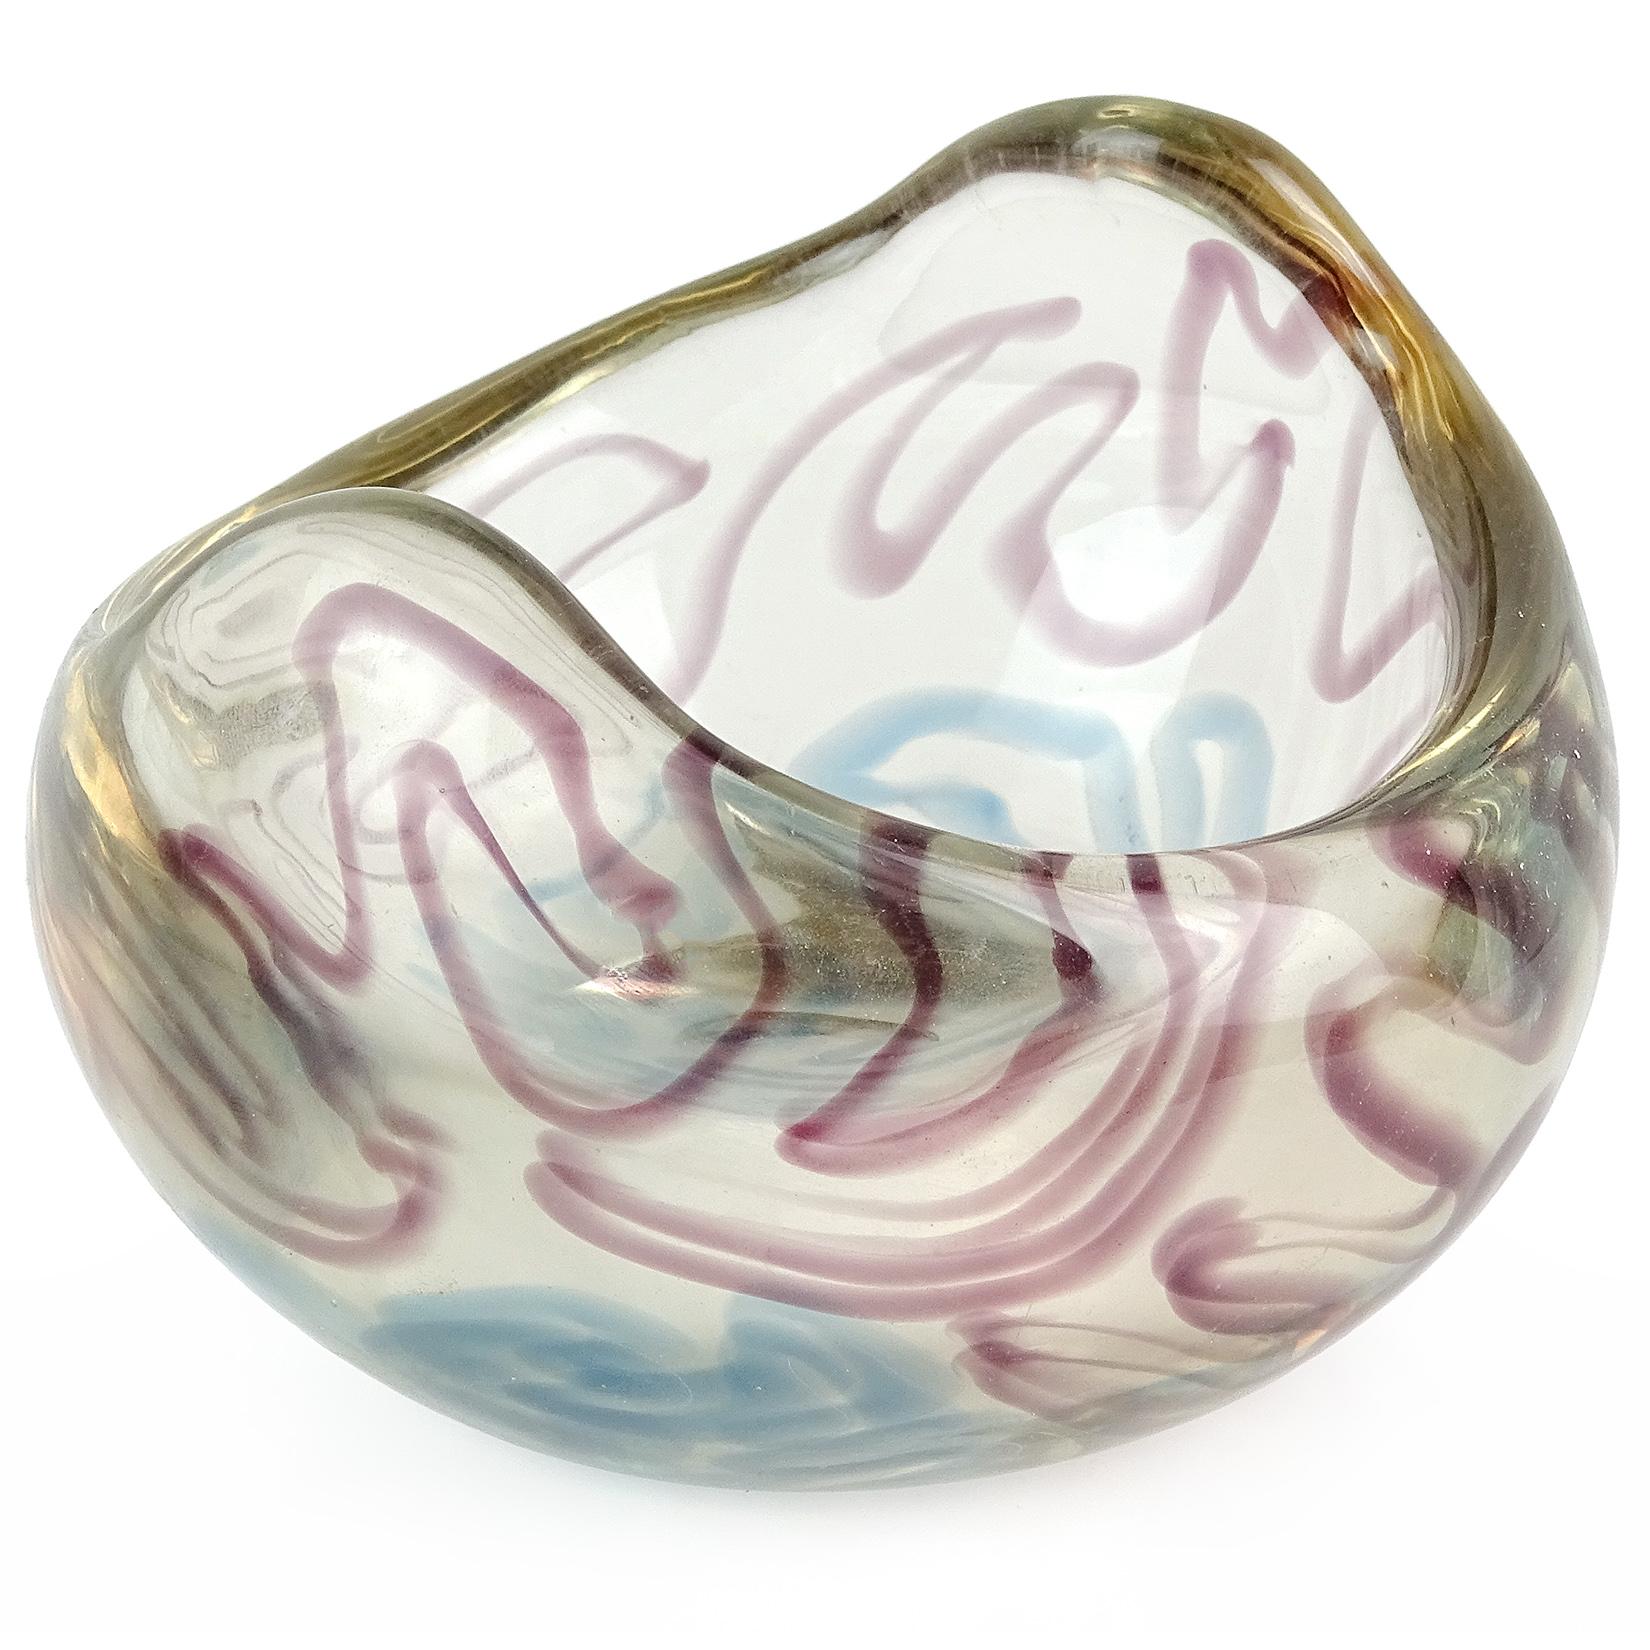 Beautiful Tora Pors hand blown blue and purple Swedish art glass bowl. Created in the Myrica technique, invented by Tora Pors, a Danish designer who worked for Kalmar Glasbruk (Swedish) from 1947-1954. The bowl has a swirling / squiggle design